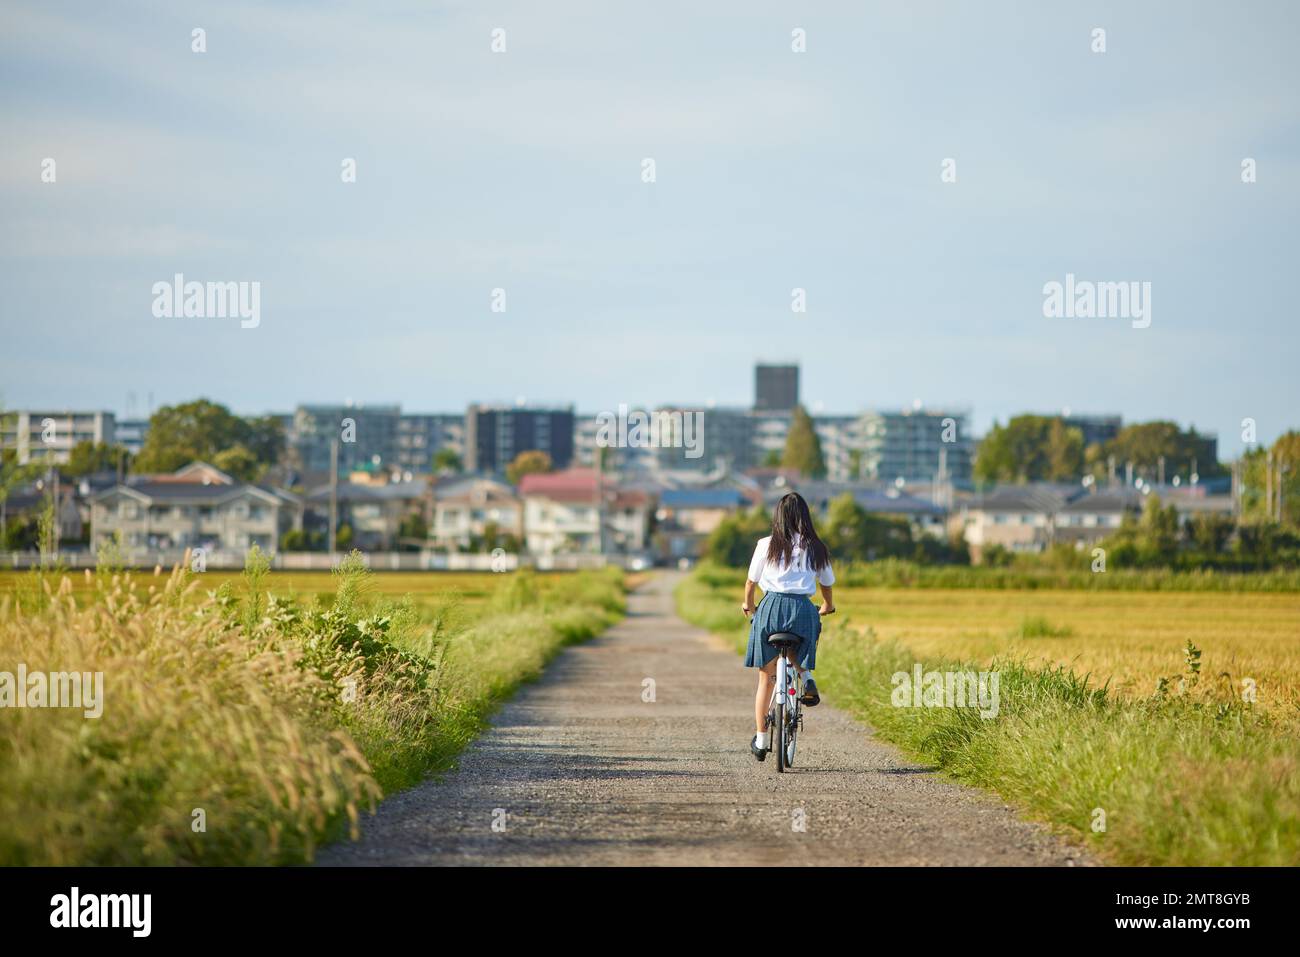 Japanese high school student on a bike outdoors Stock Photo